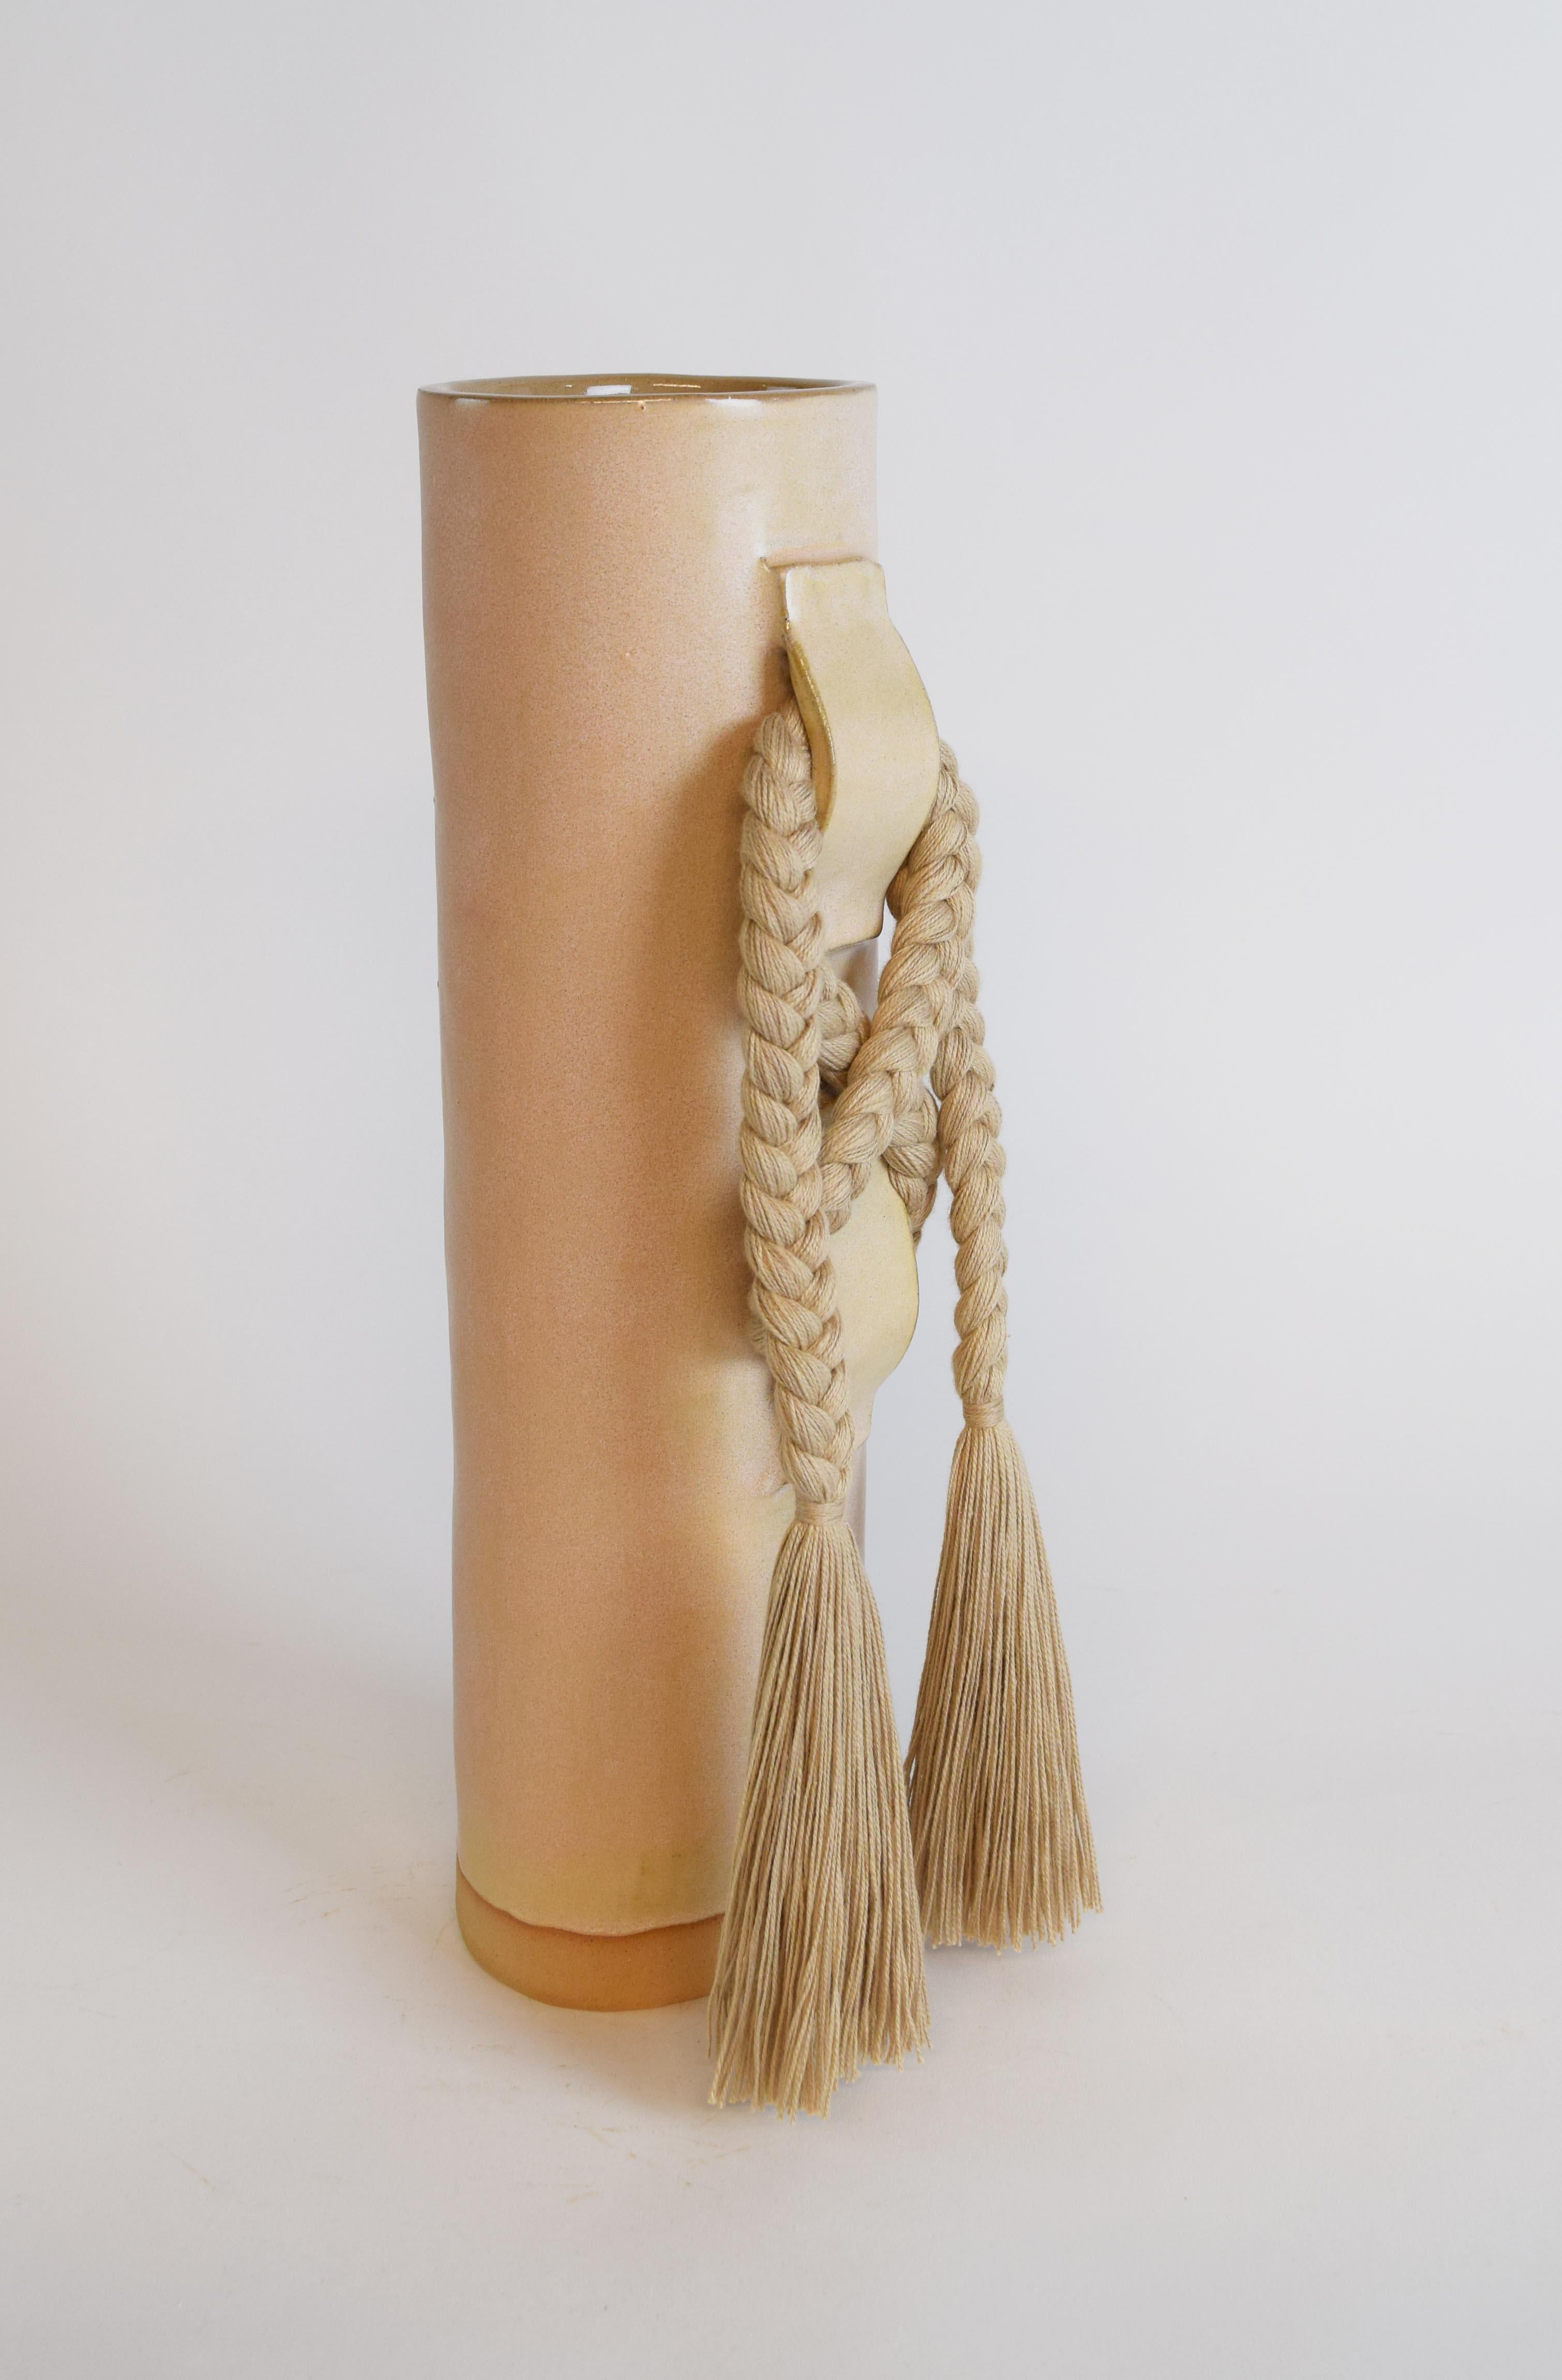 Vase #696 by Karen Gayle Tinney

Featuring a large gestural knot, this vase takes inspiration from the braided details of Karen’s one of a kind wall sculptures.

Hand formed stoneware with satin tan glaze. Tan cotton braided details (braid is sewn